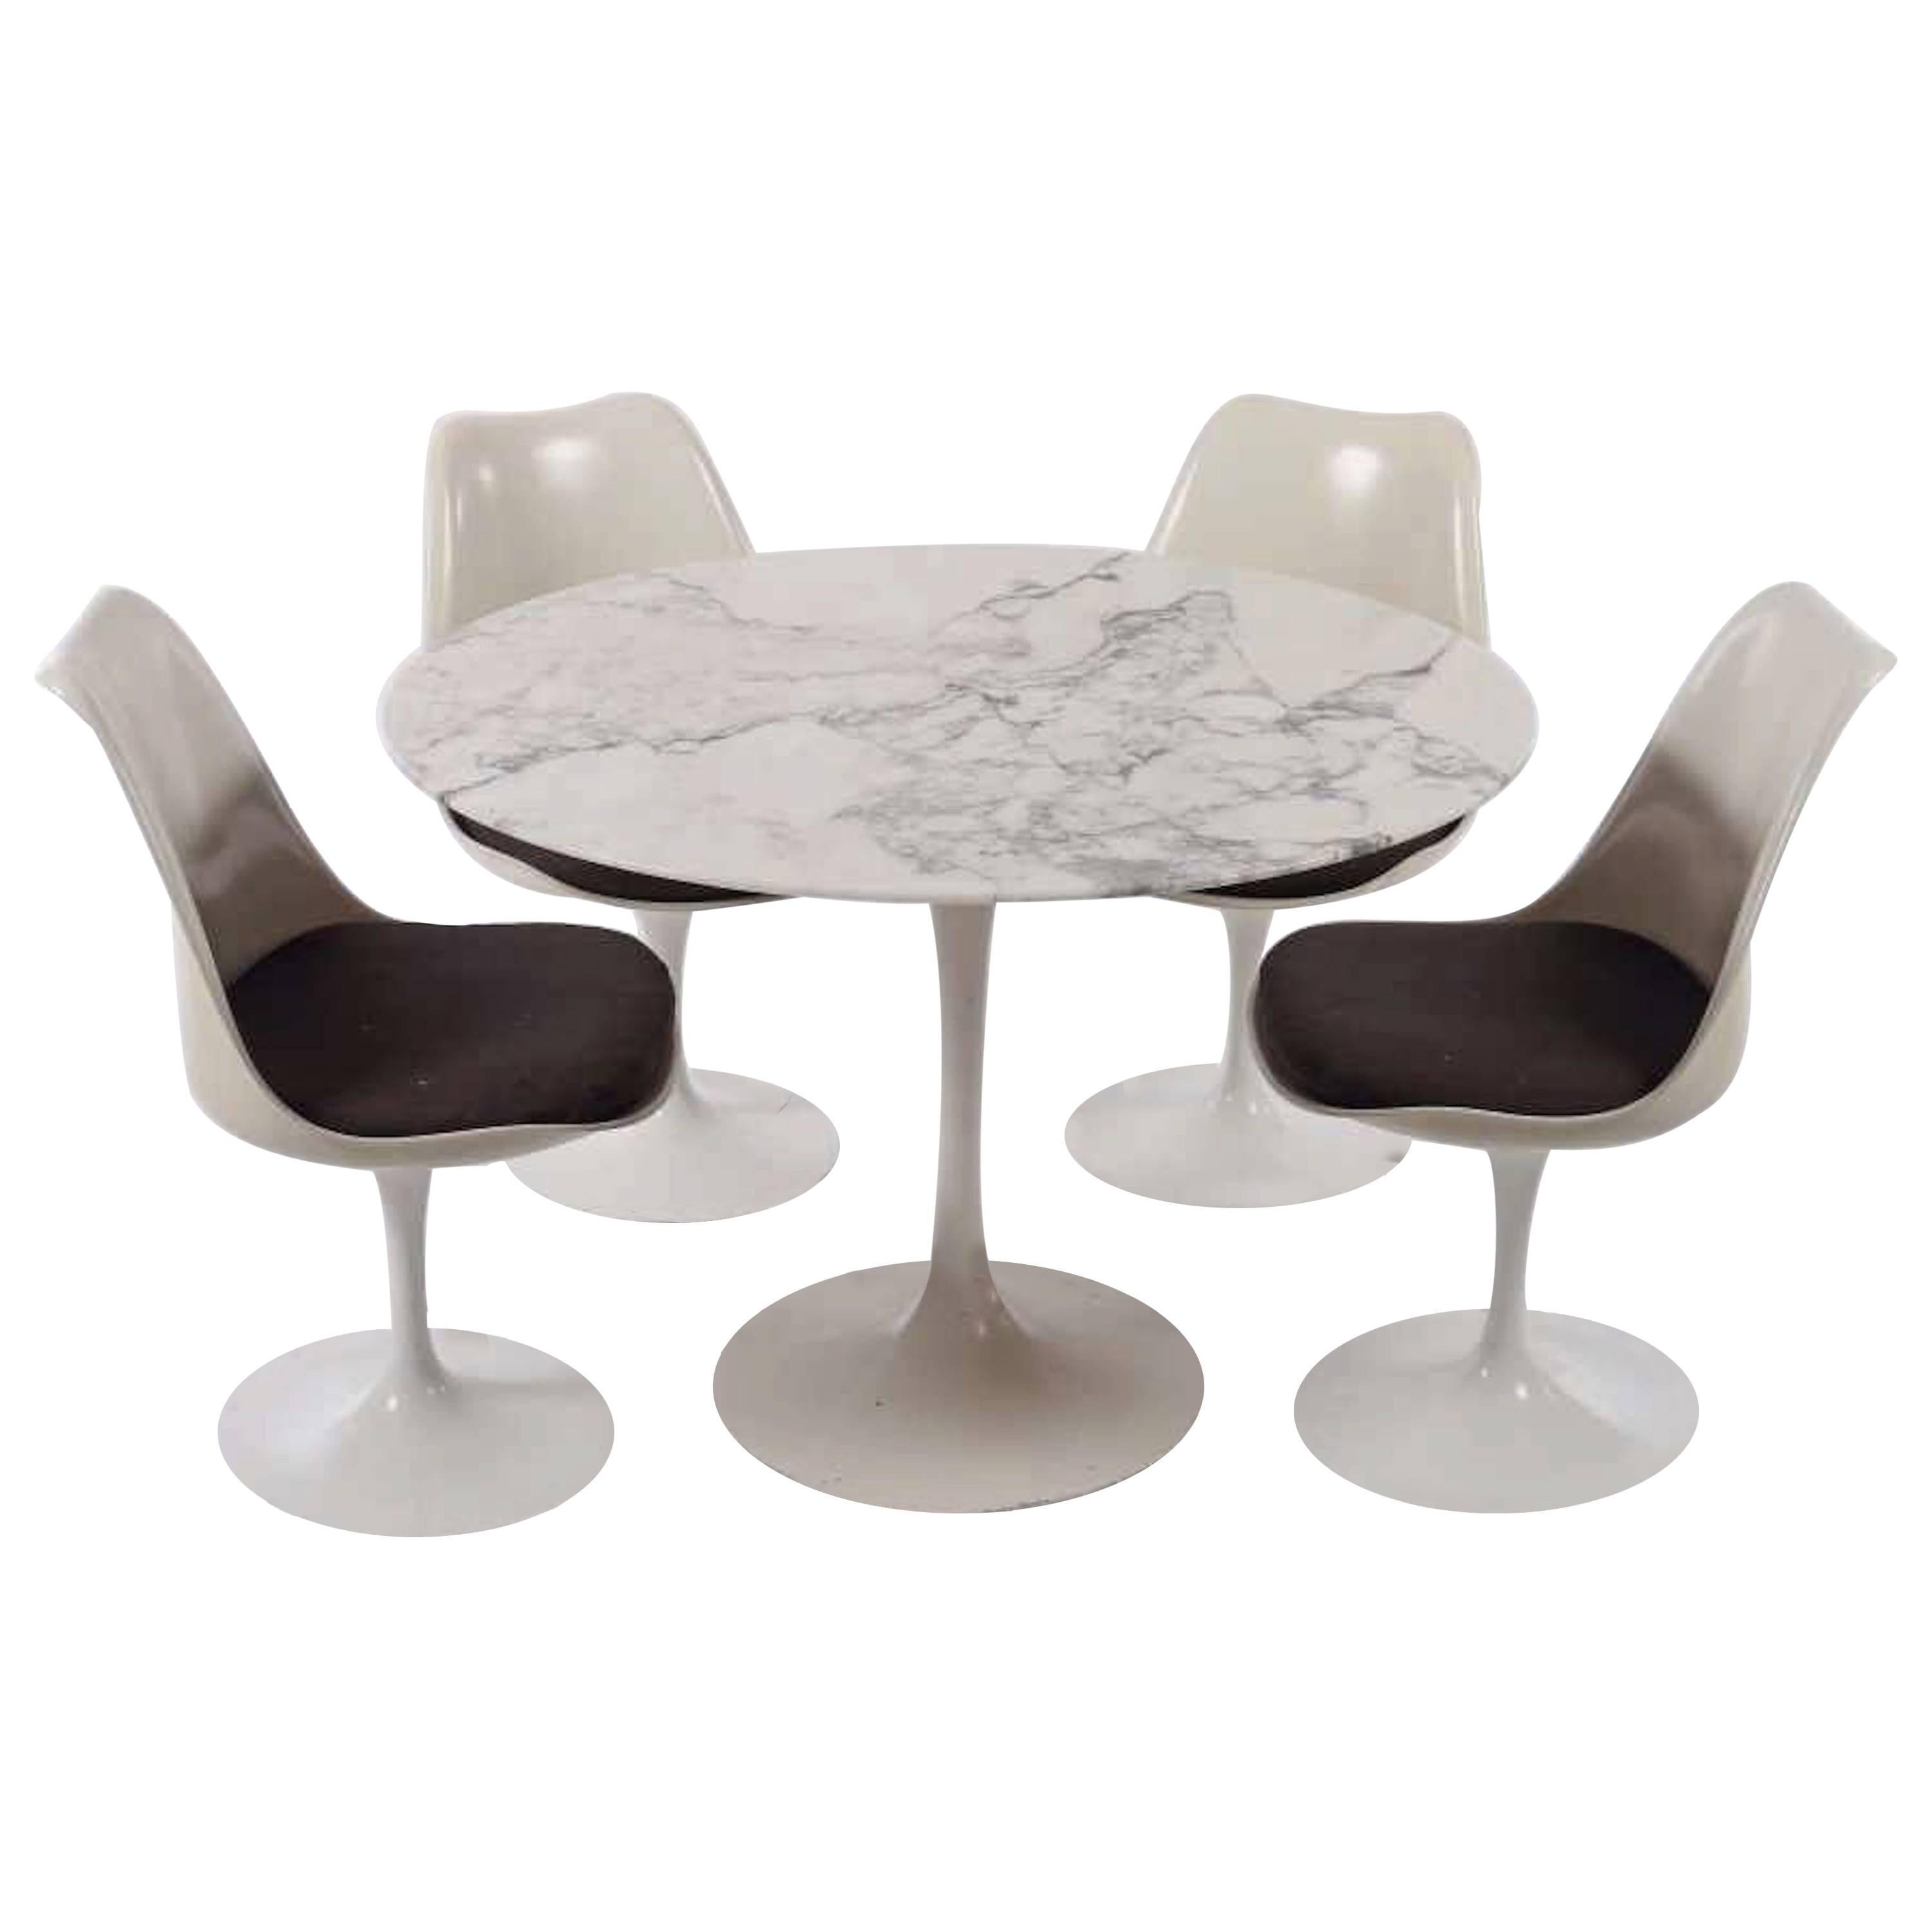 Tulip Dining Set Table and Chairs by Eero Saarinen for Knoll International 1970s For Sale